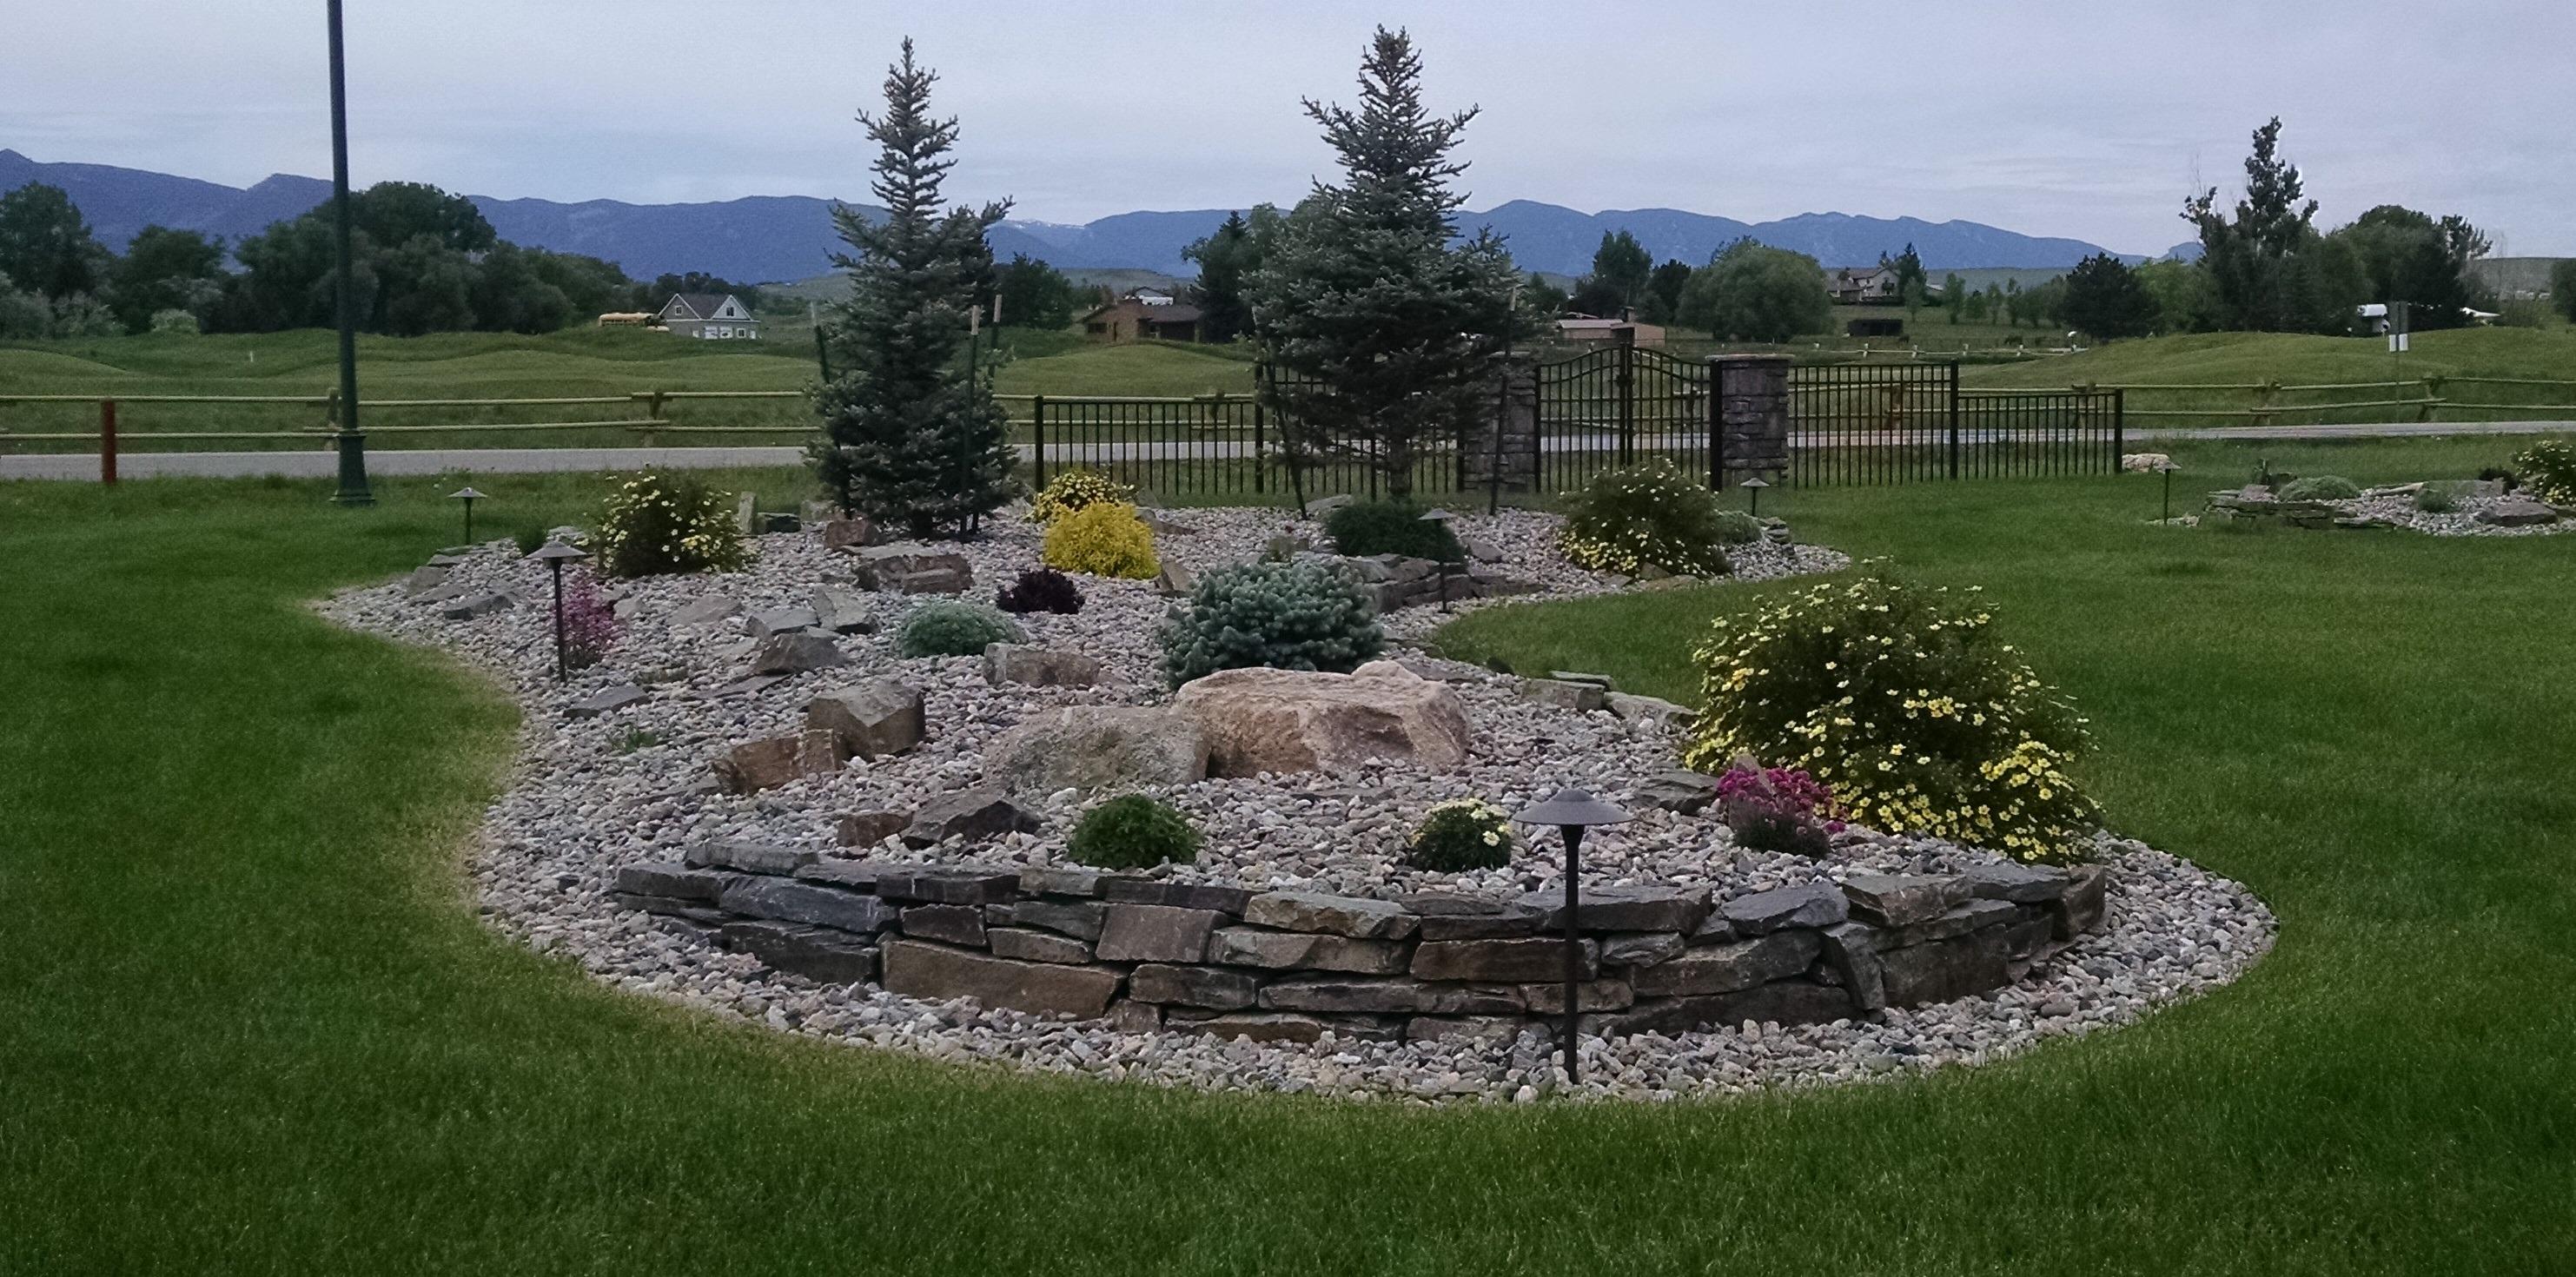 Custom Sprinkler and Landscaping - Sheridan, WY 82801 - (307)674-7155 | ShowMeLocal.com